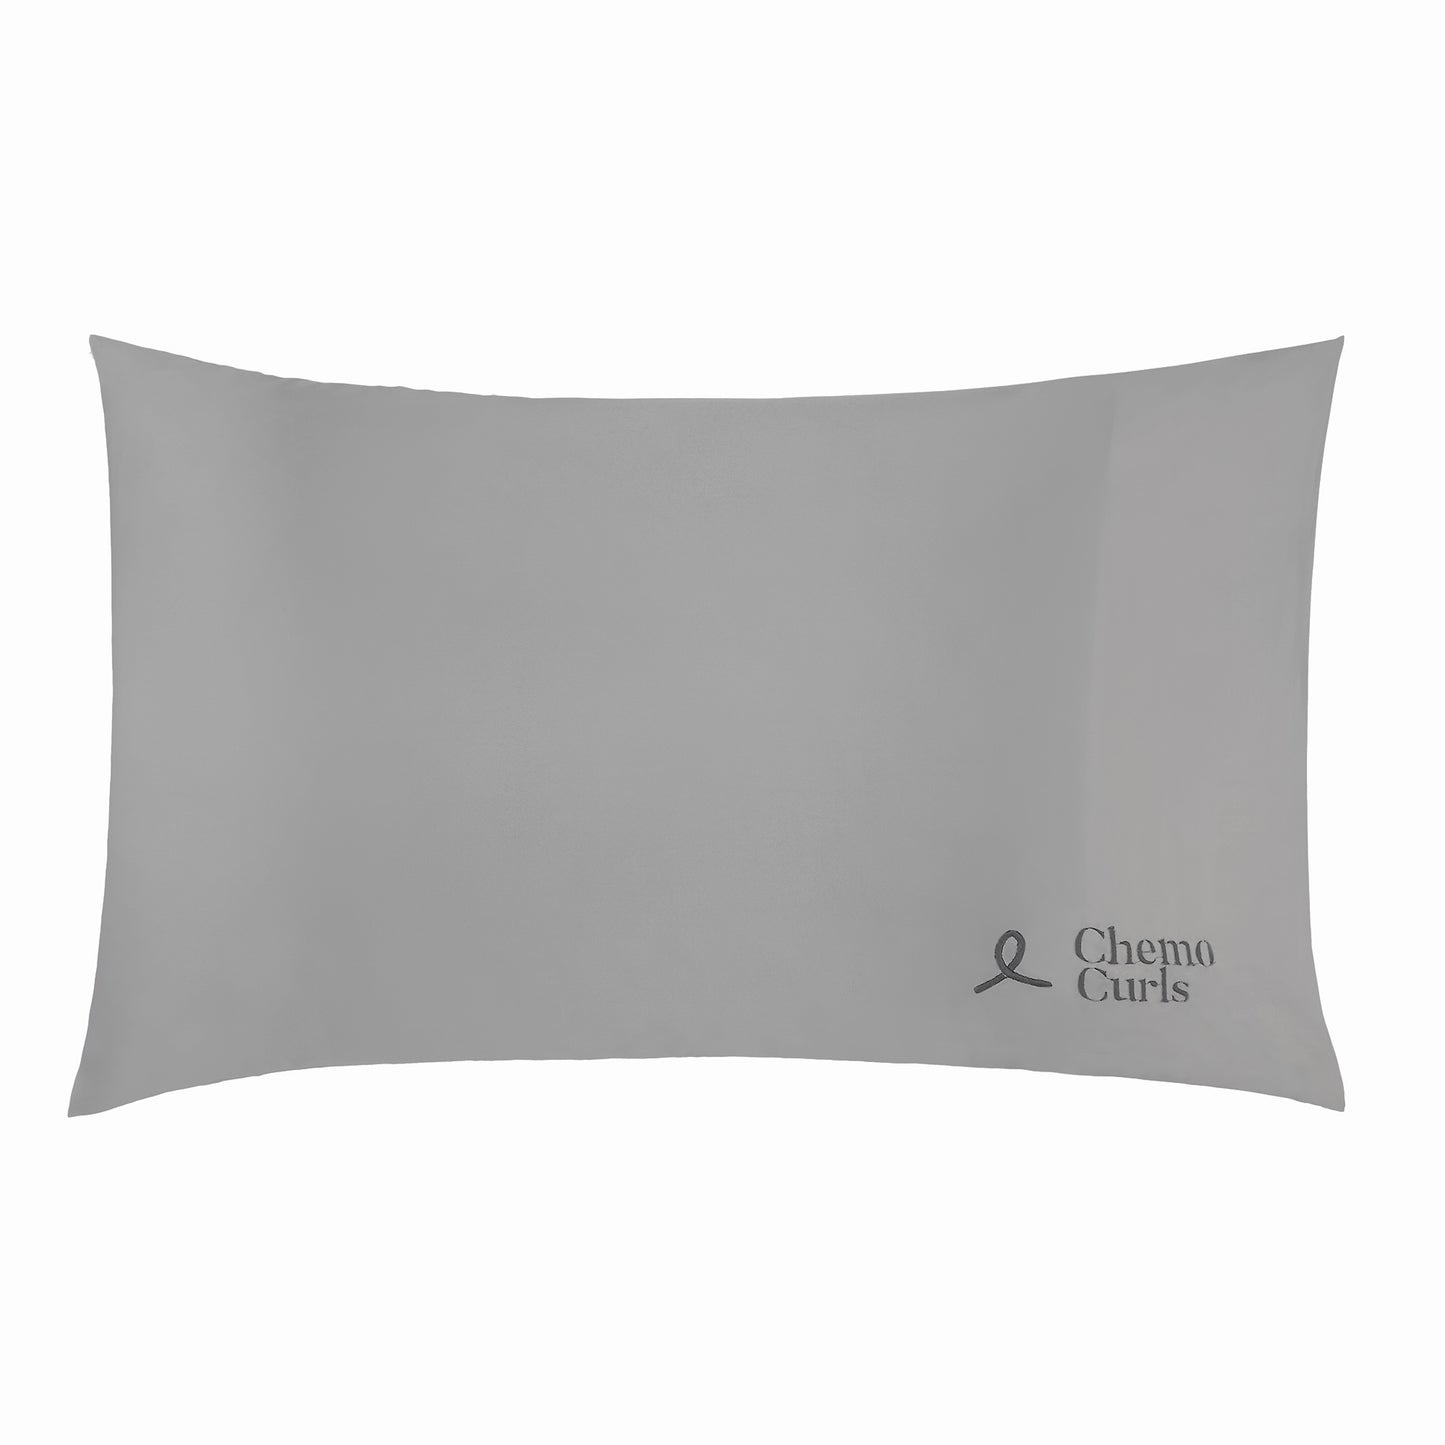 An image of a grey satin pillowcase with a sleek and smooth surface. The soft grey color of the pillowcase exudes elegance and sophistication. The Chemo Curls logo is skillfully embroidered in black thread on the lower left corner, adding a personalized touch. The satin fabric catches the light, creating a subtle sheen and highlighting the luxurious texture. This image portrays a sense of comfort, style, and attention to detail.